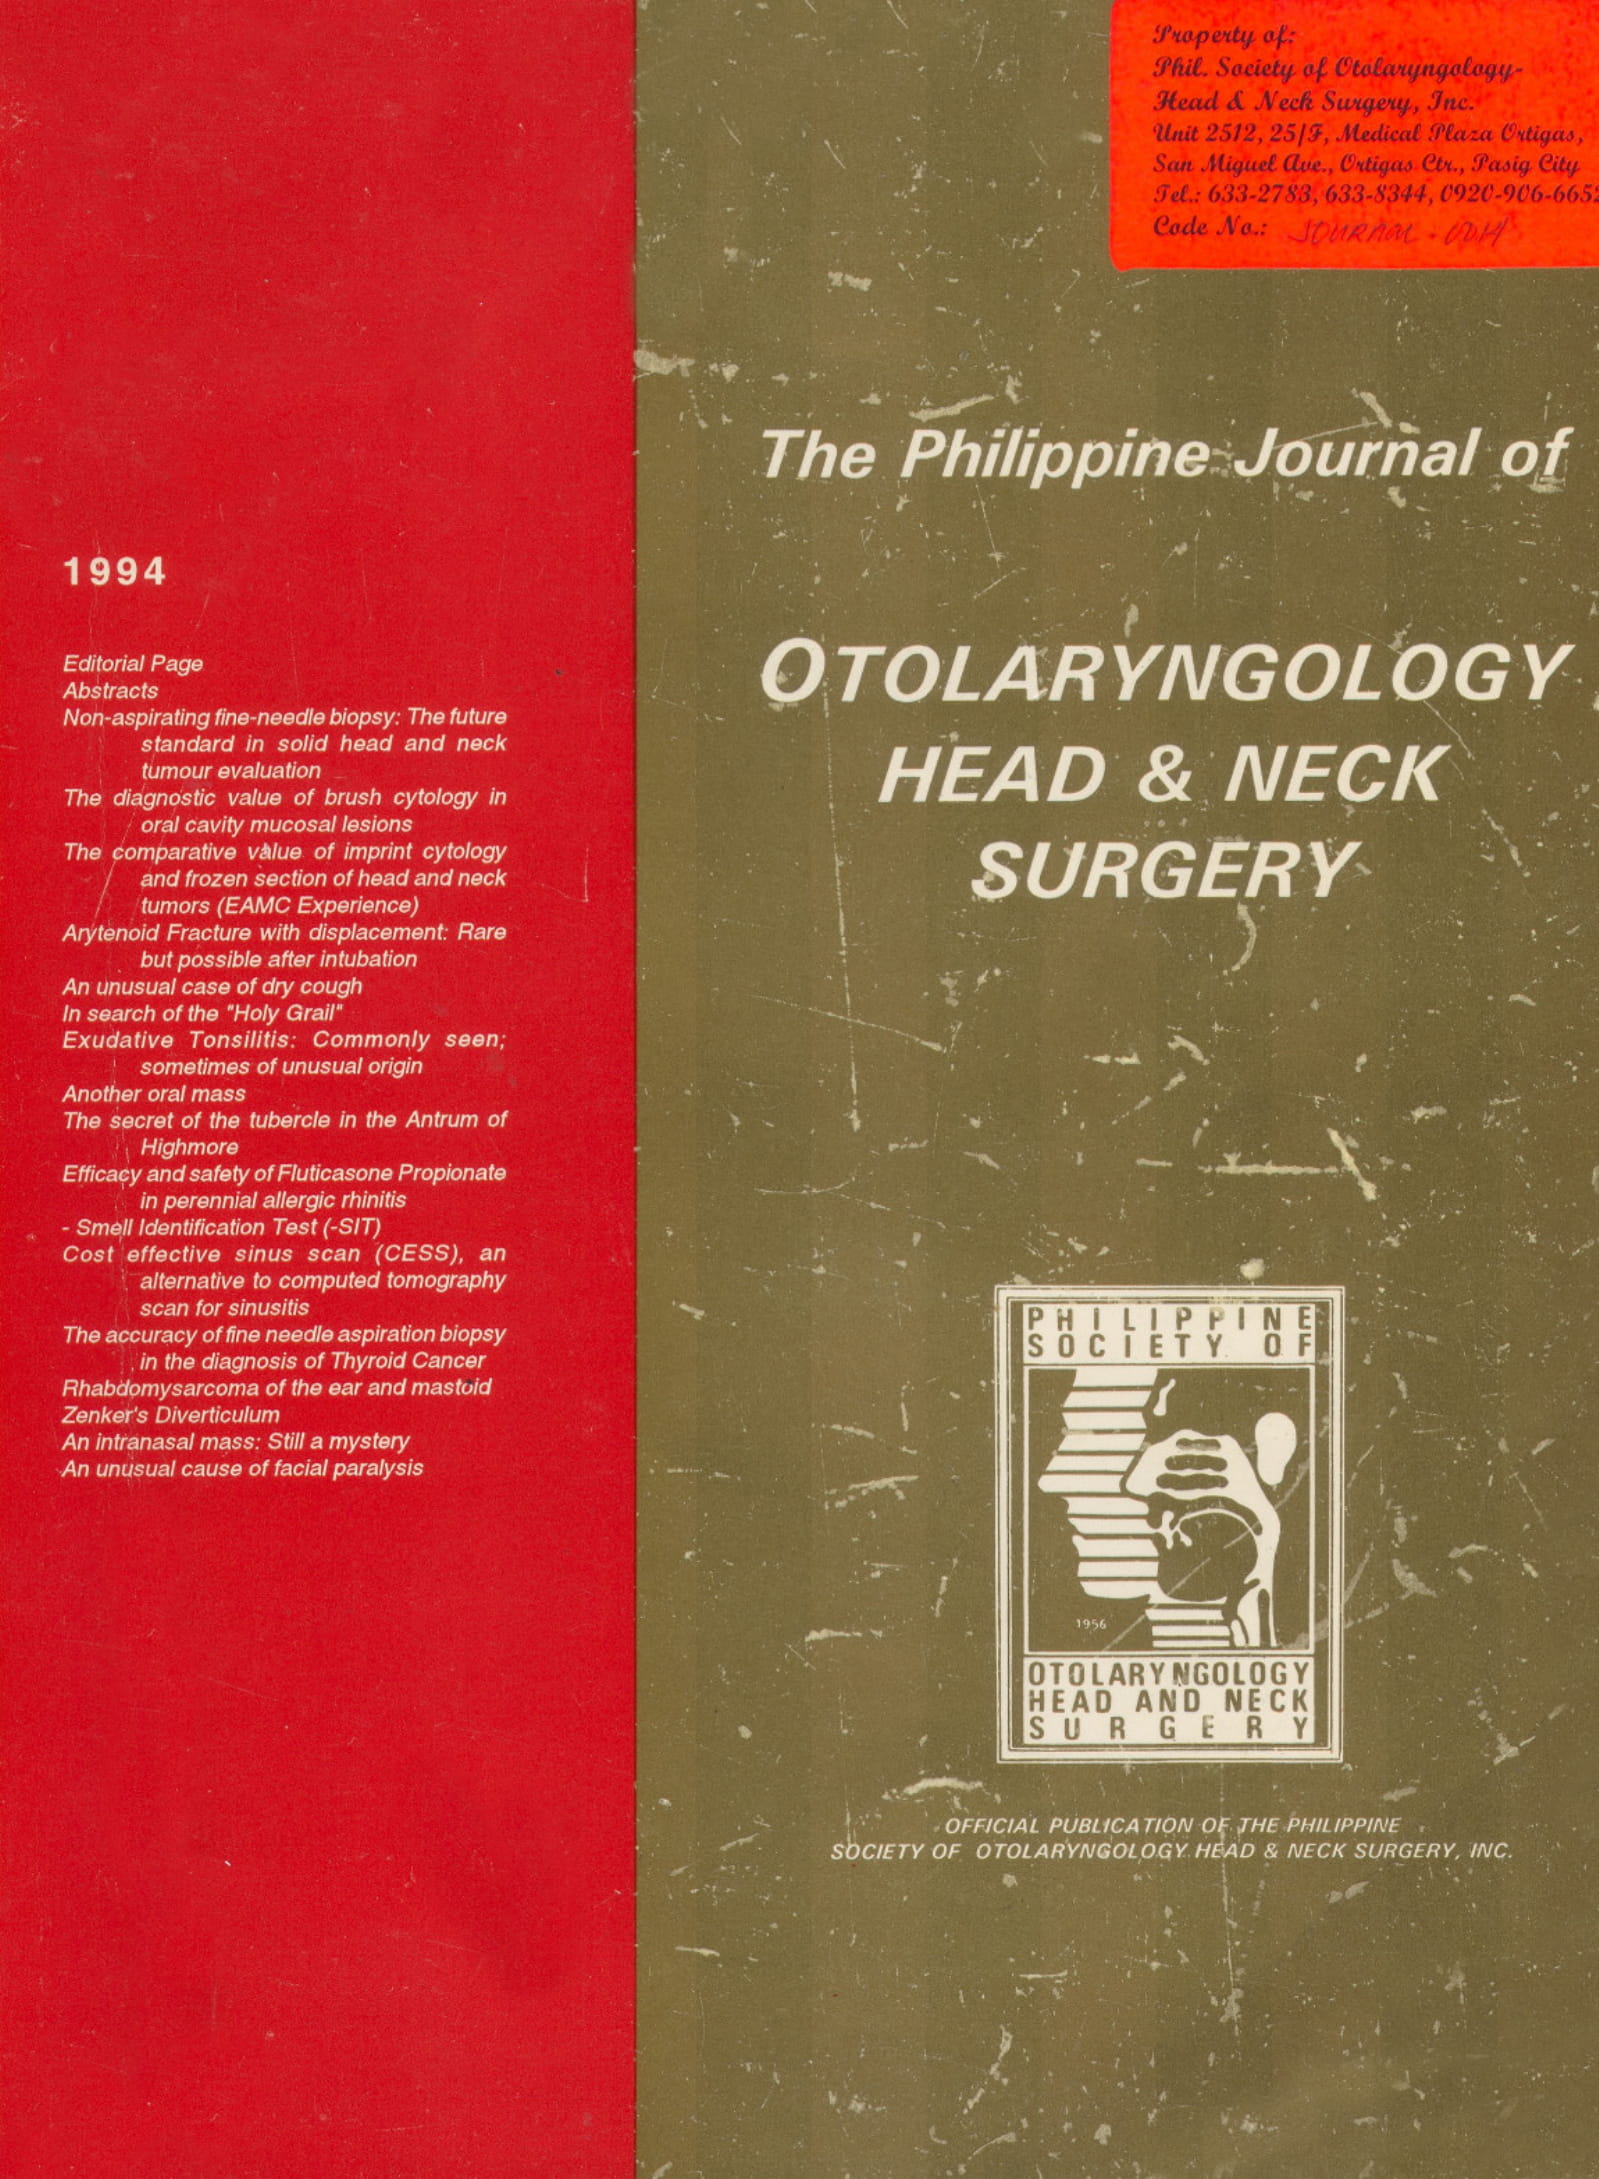 					View 1994: Philippine Journal of Otolaryngology-Head and Neck Surgery
				